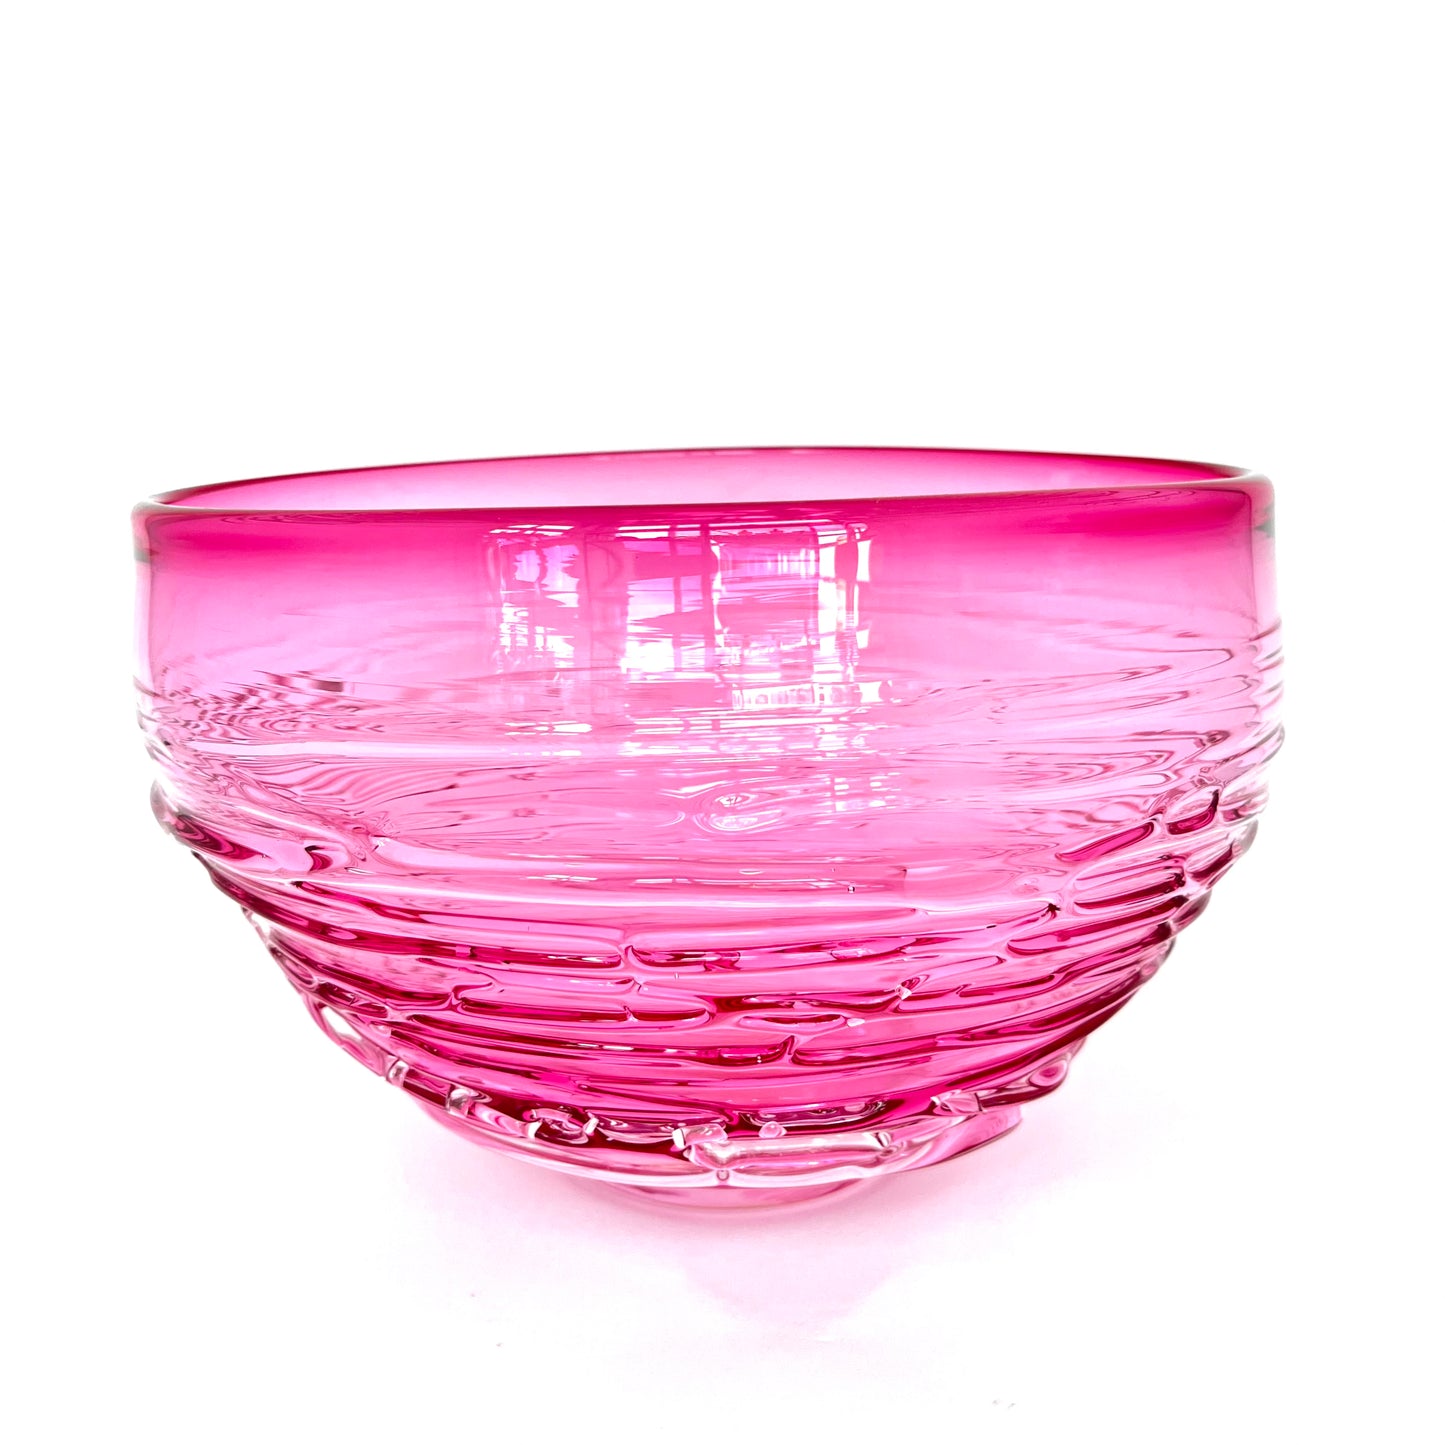 Nest Large Pink Bowl with Foot